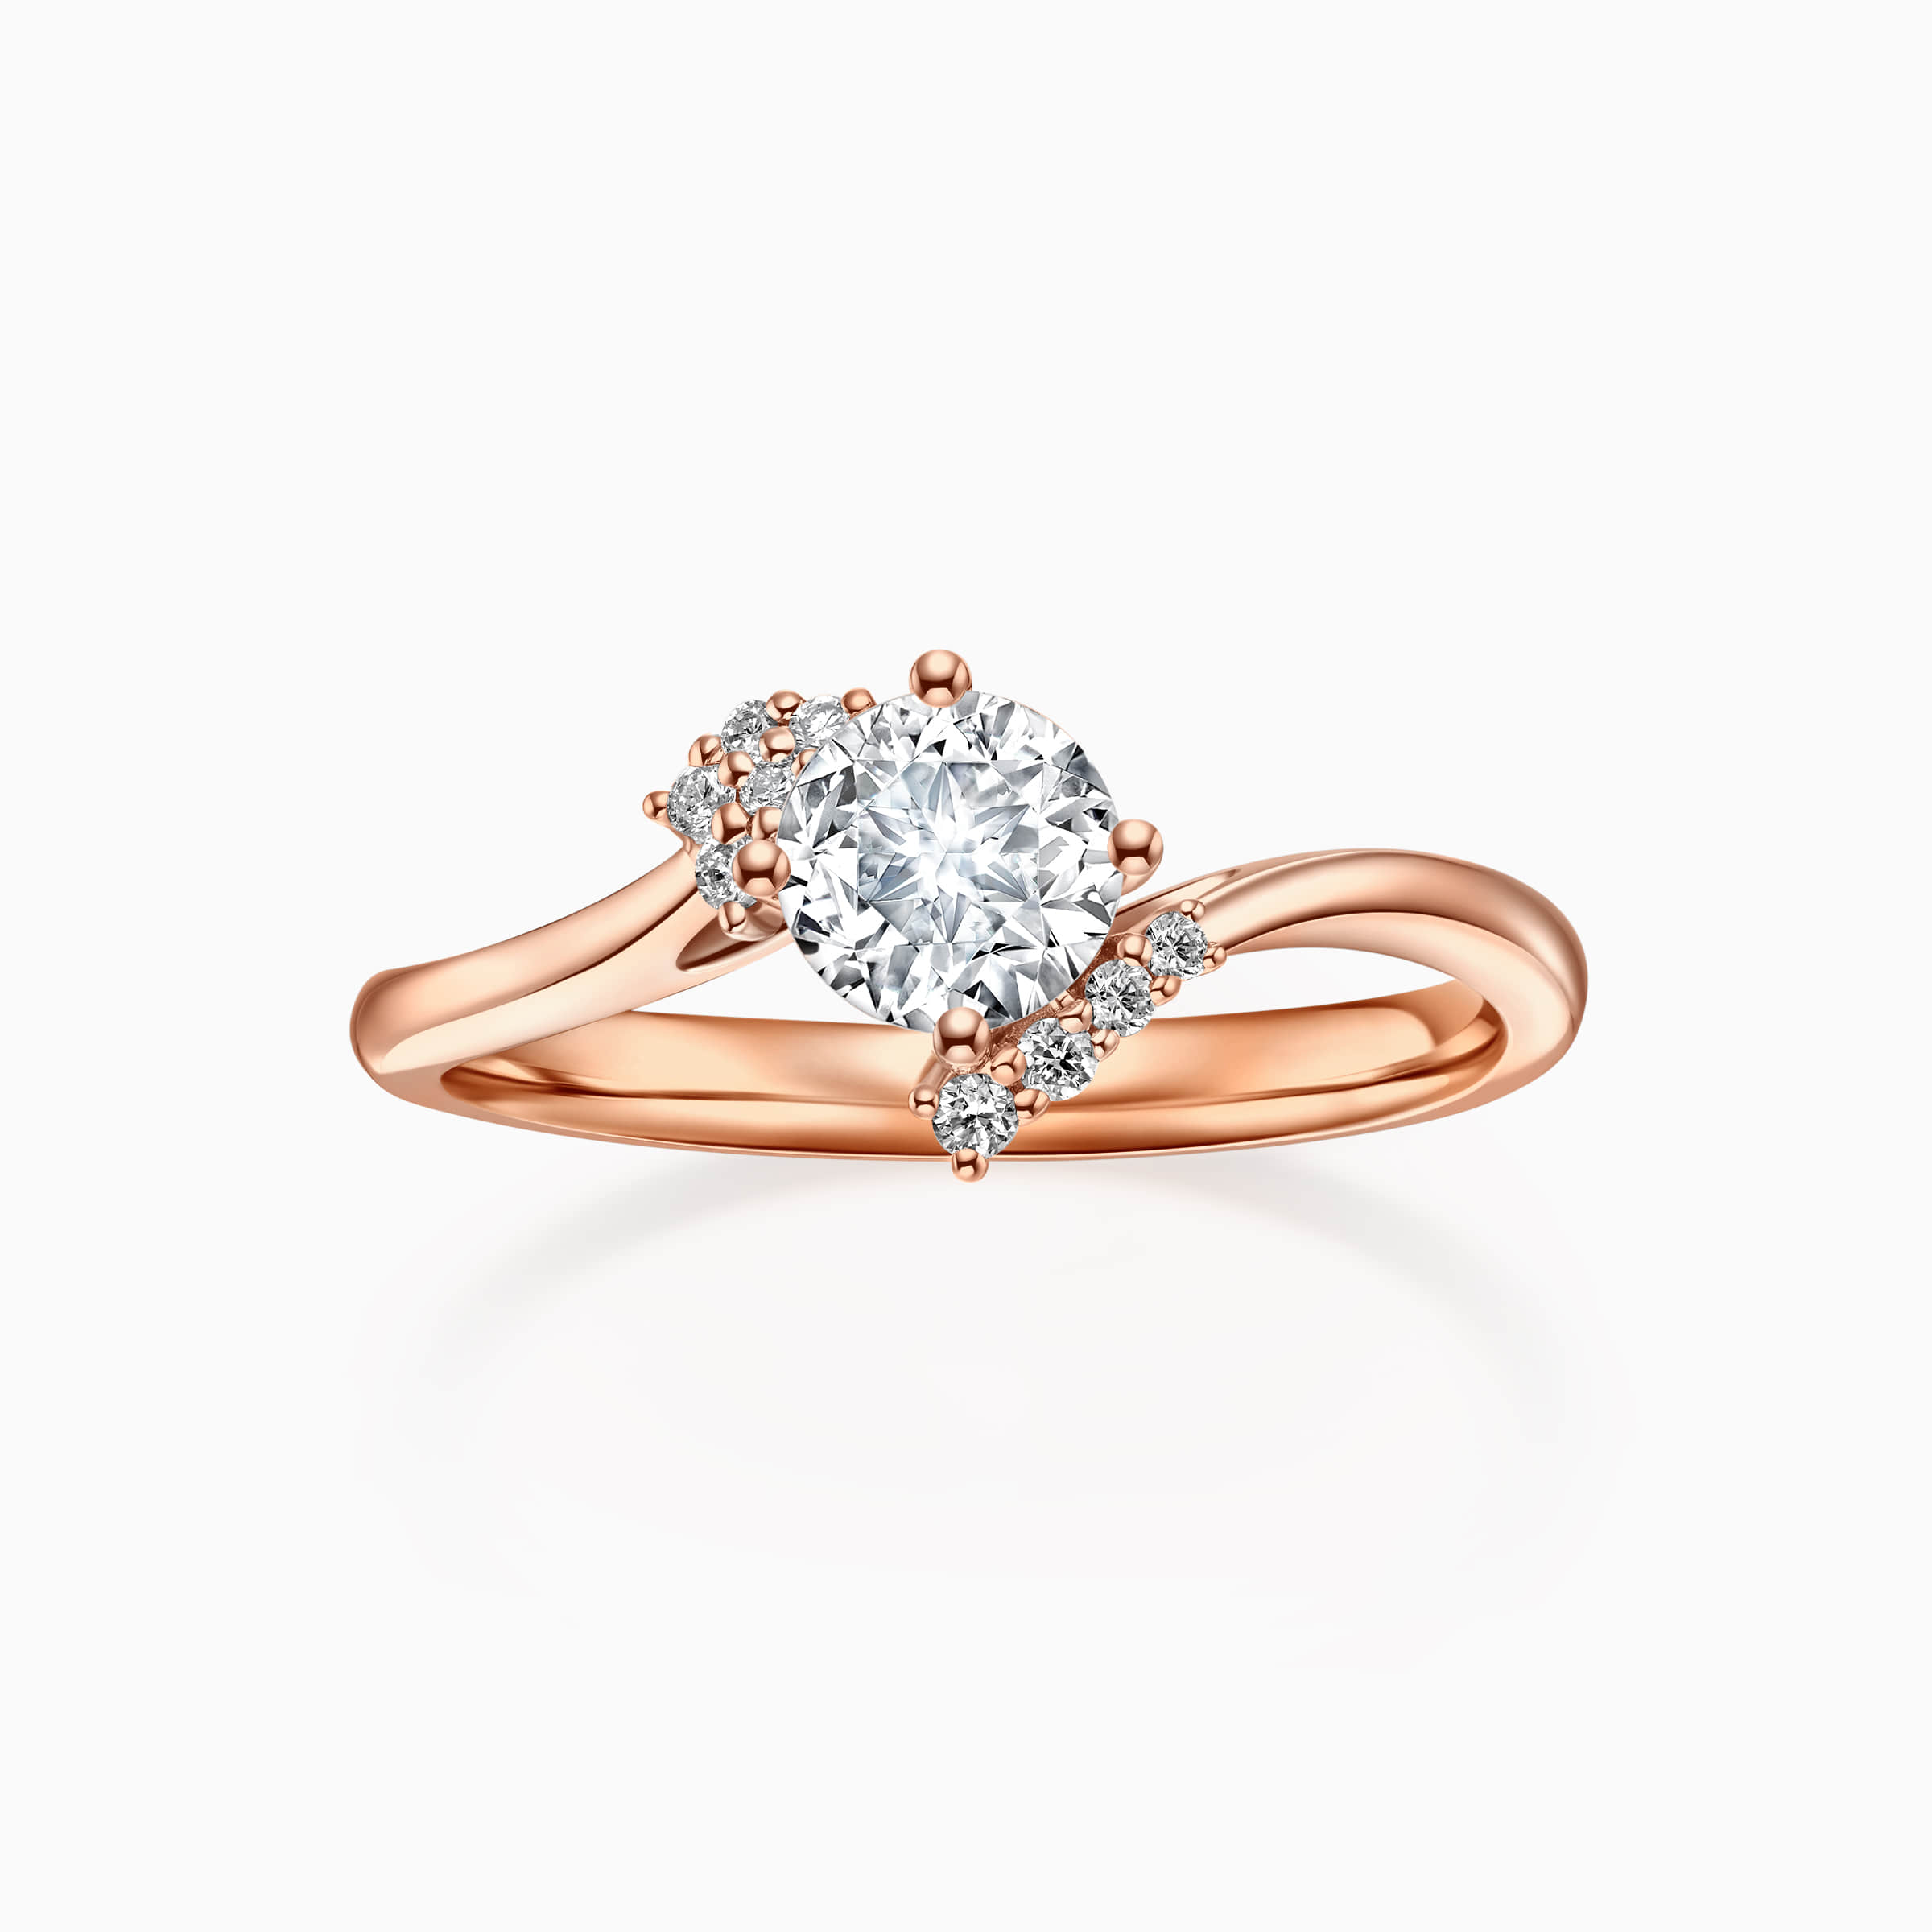 Darry Ring diamond bypass engagement ring rose gold